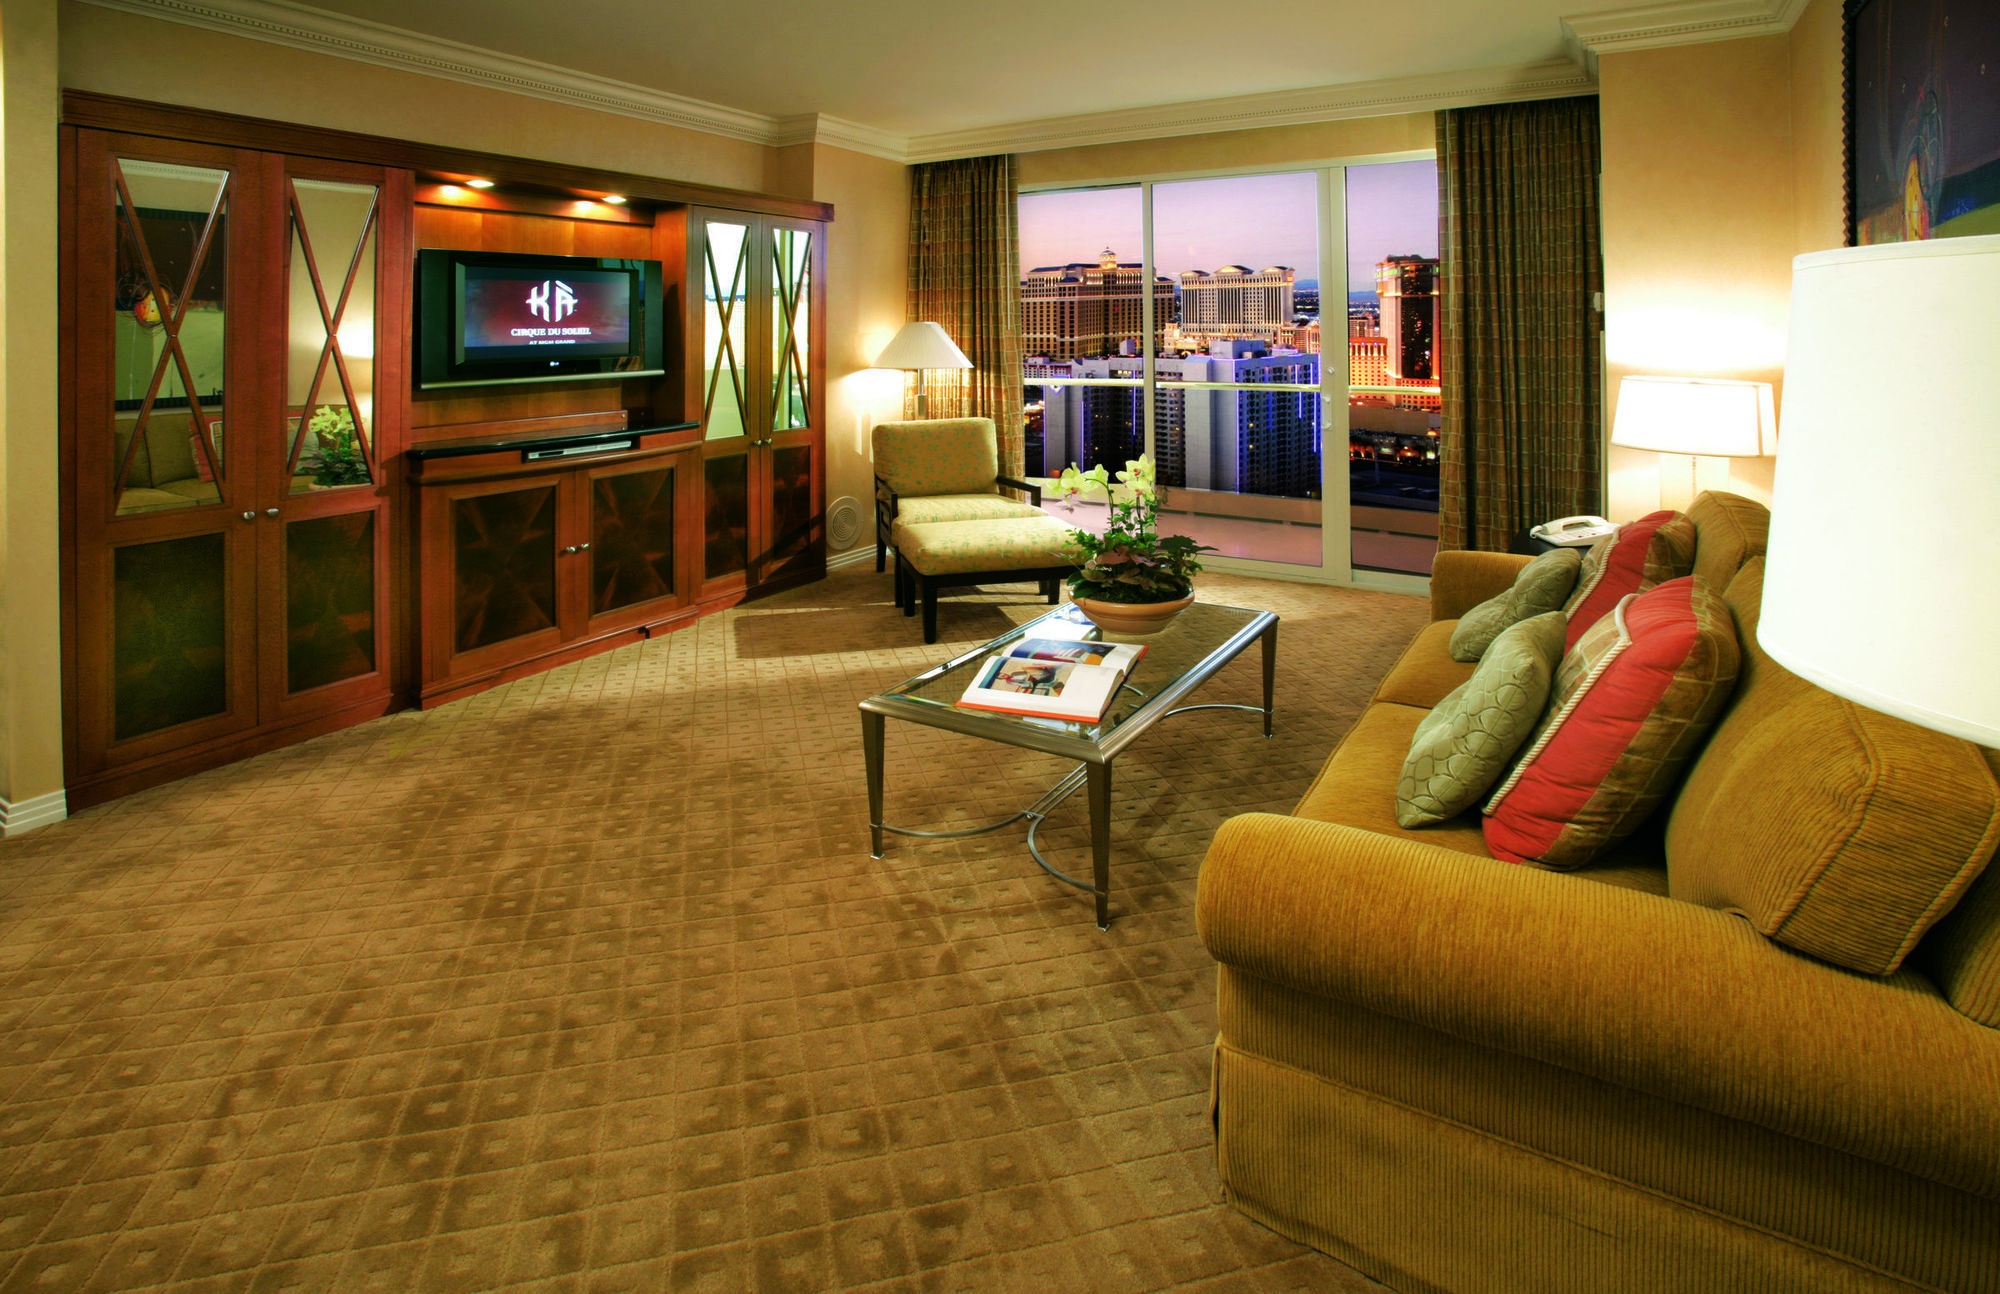 The Signature At Mgm Grand - All Suites Las Vegas Room photo